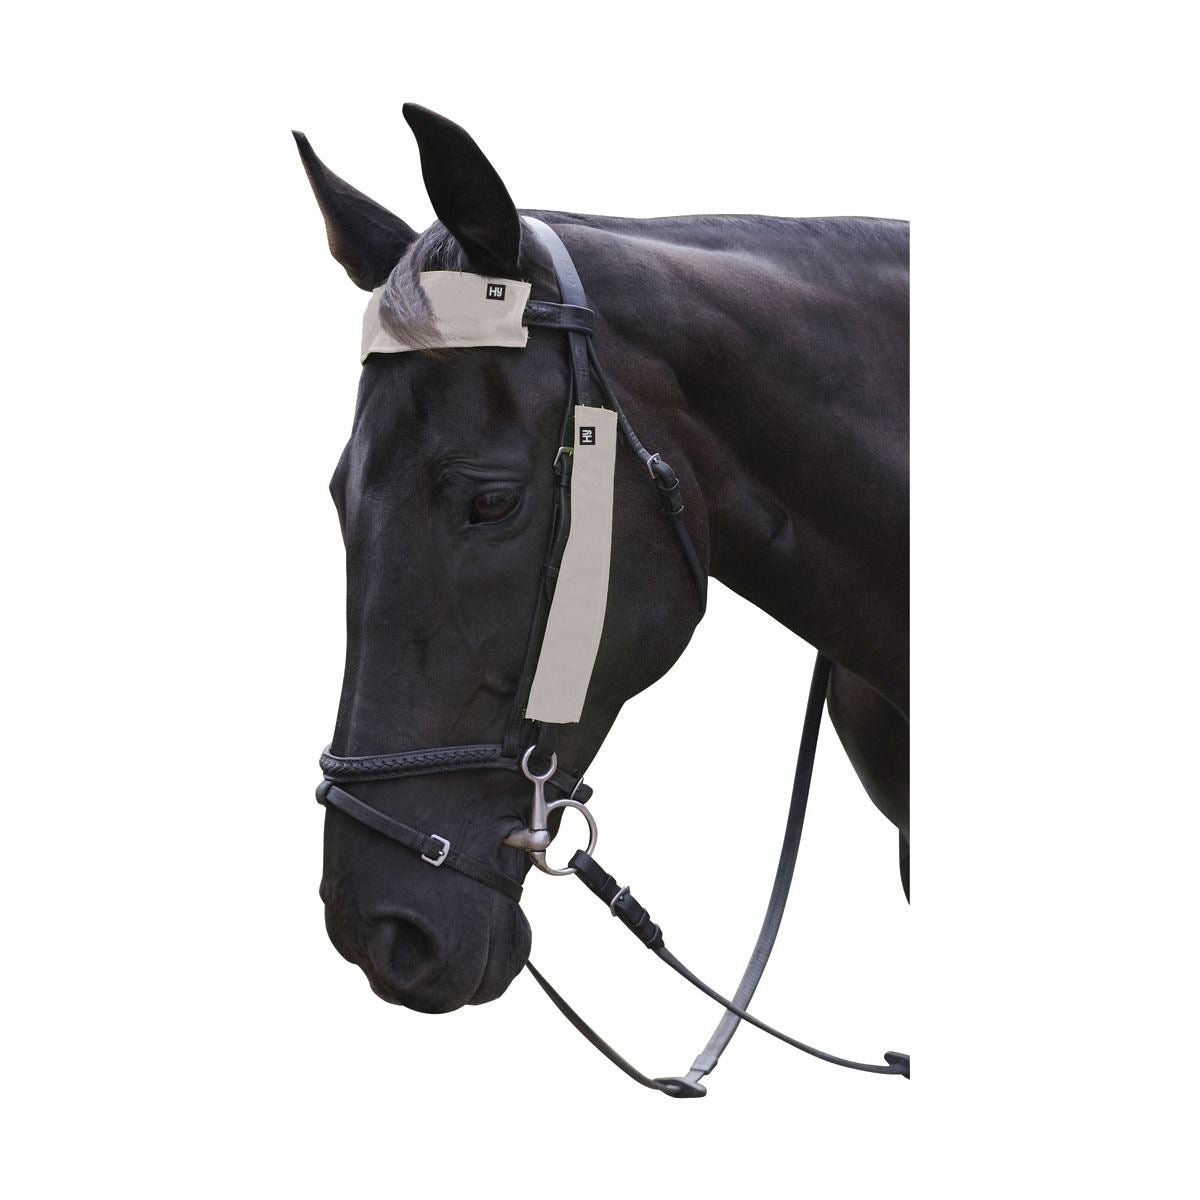 Silva Flash Reflective Bridle Set by Hy Equestrian - Just Horse Riders